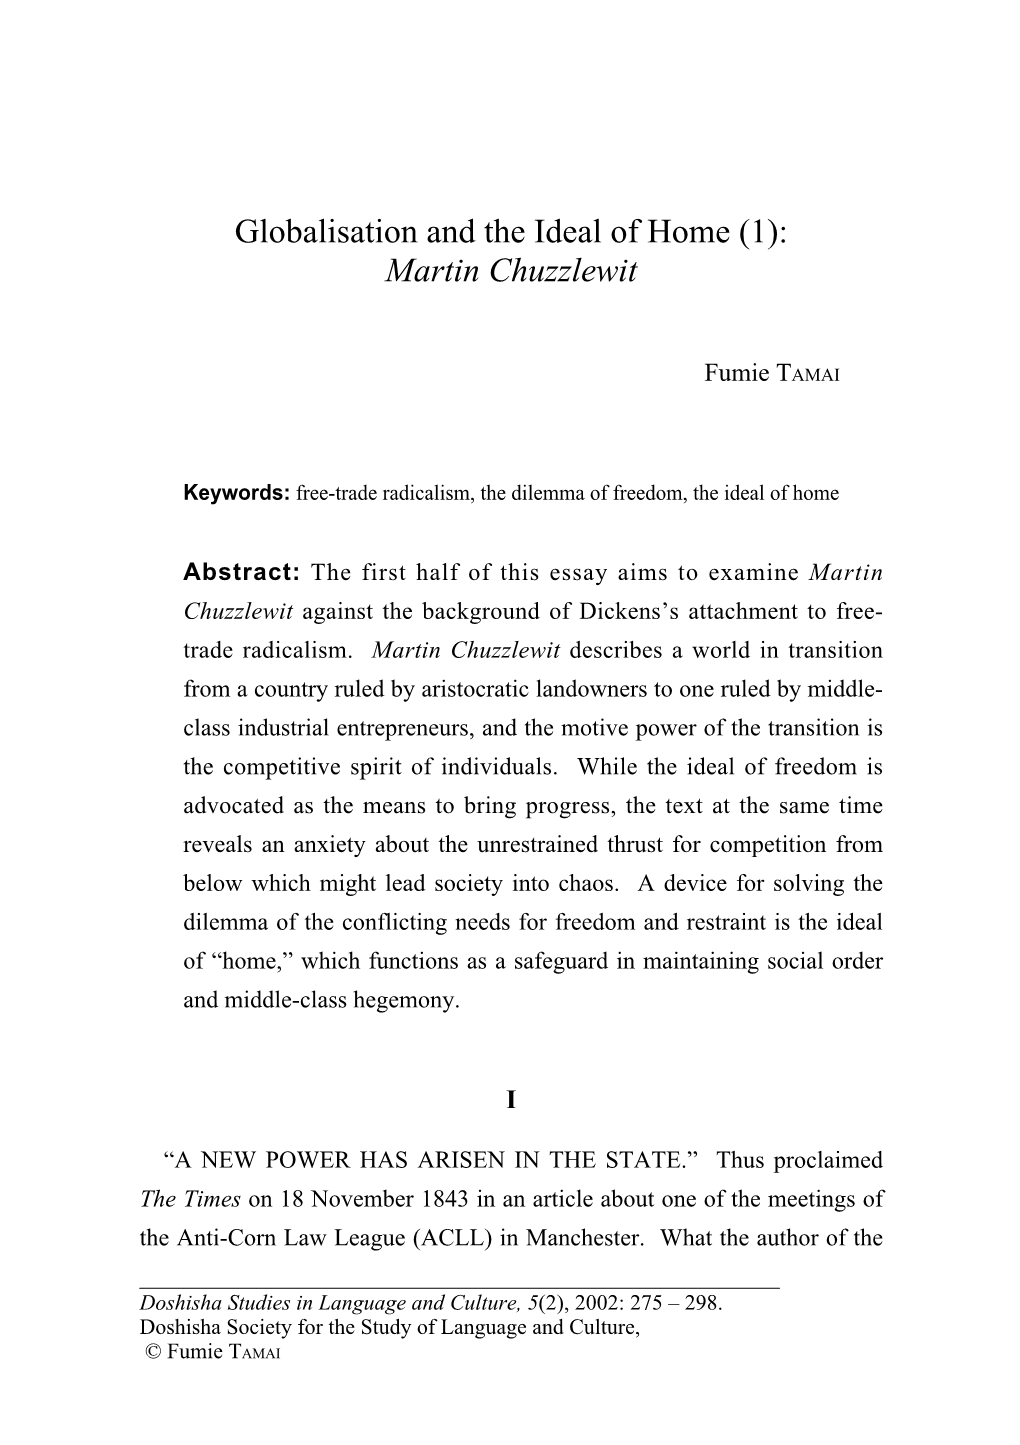 Globalisation and the Ideal of Home (1): Martin Chuzzlewit 275